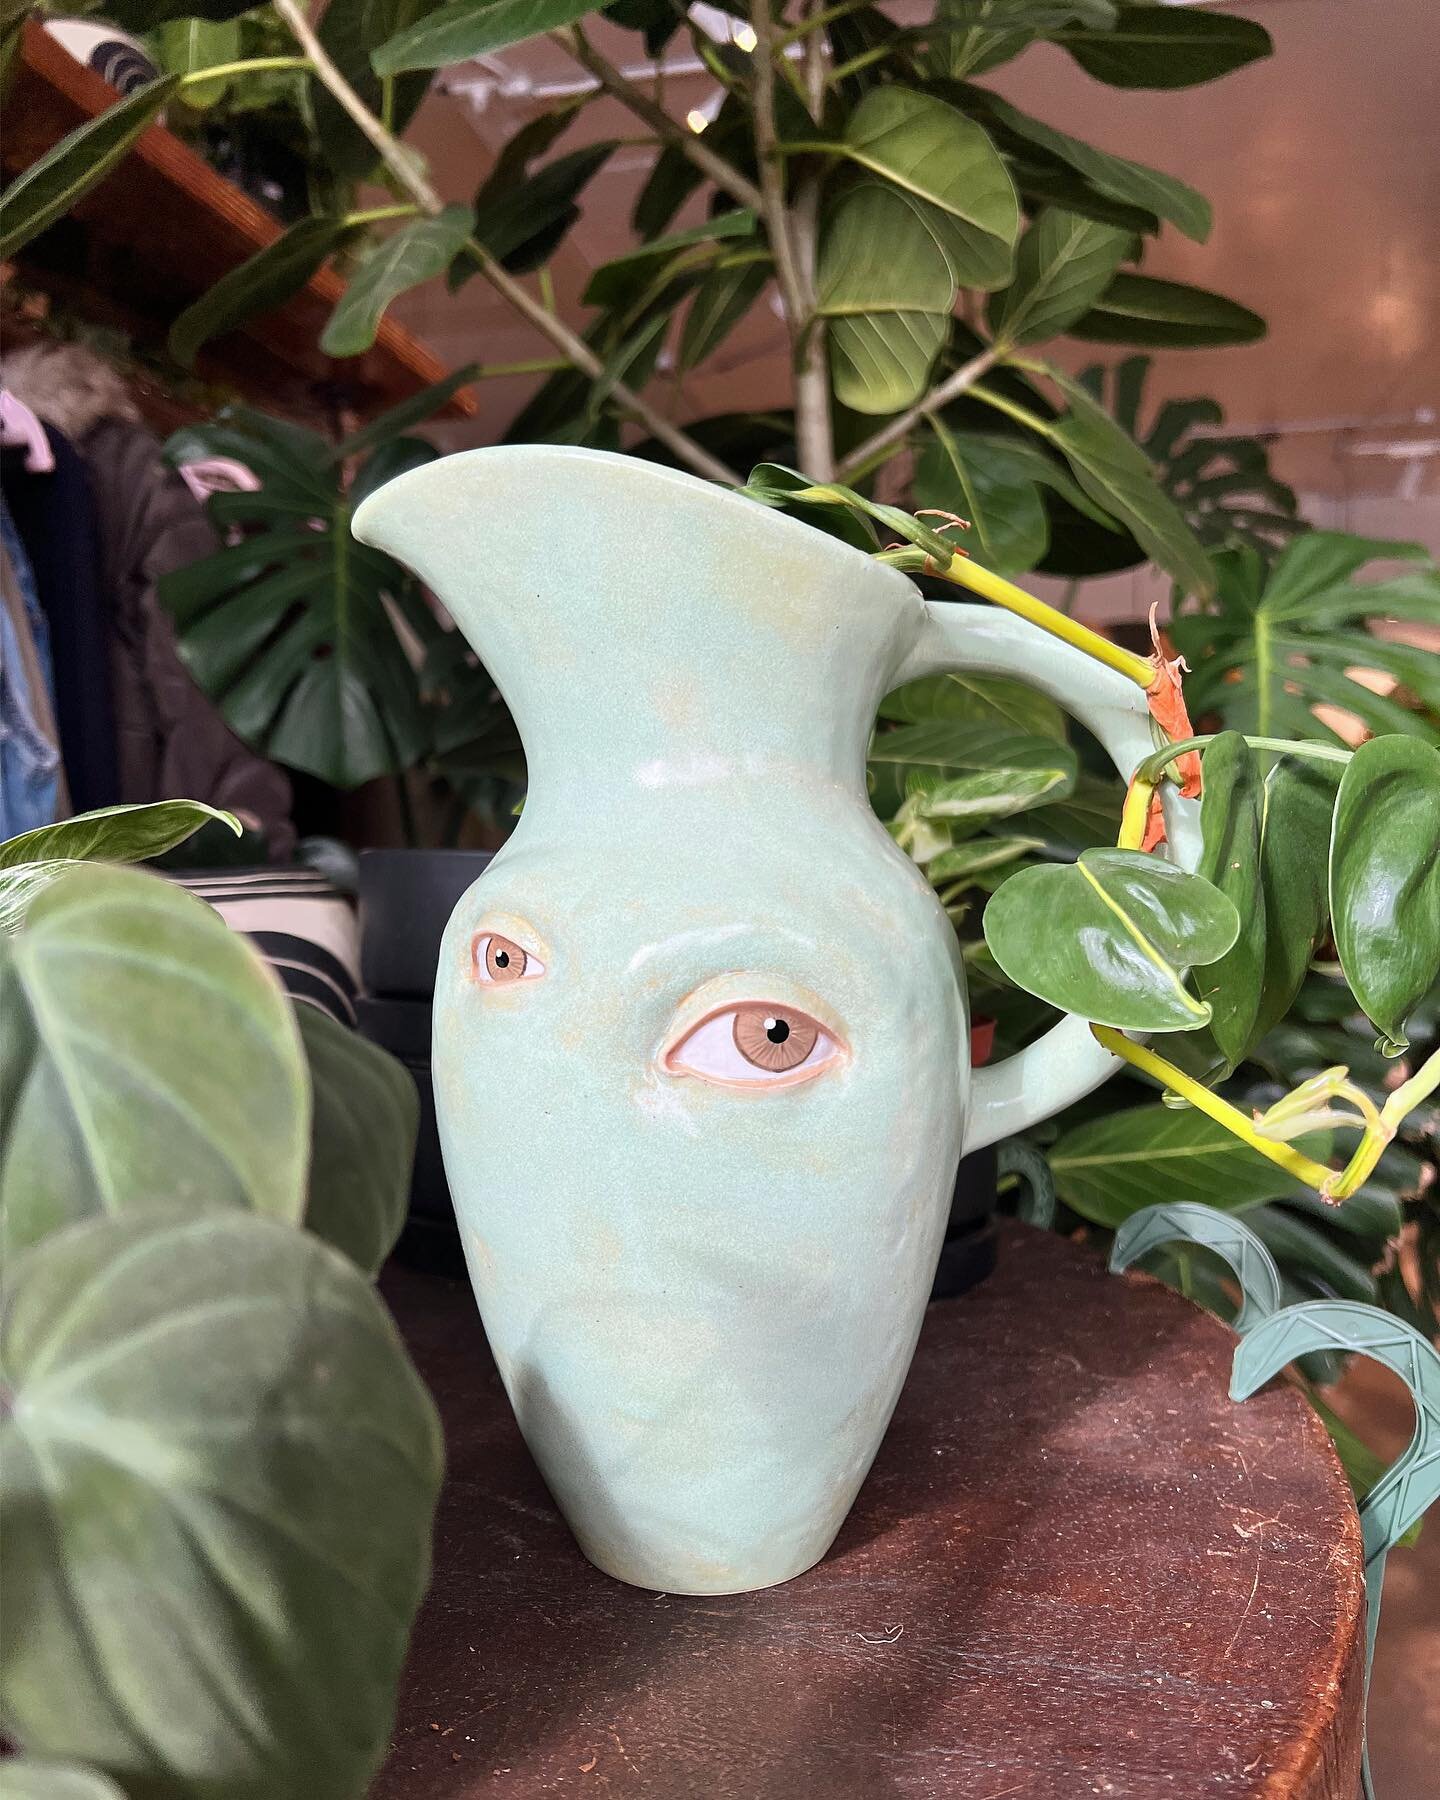 Bring your artwork to work day! This pitcher looks right at home hanging at @sierrawatergardens !!
🪴
🏺
👁️
#ceramics #sierrawatergardens #ceramicart #eyeart #eyeseeyou #aliciaannceramics